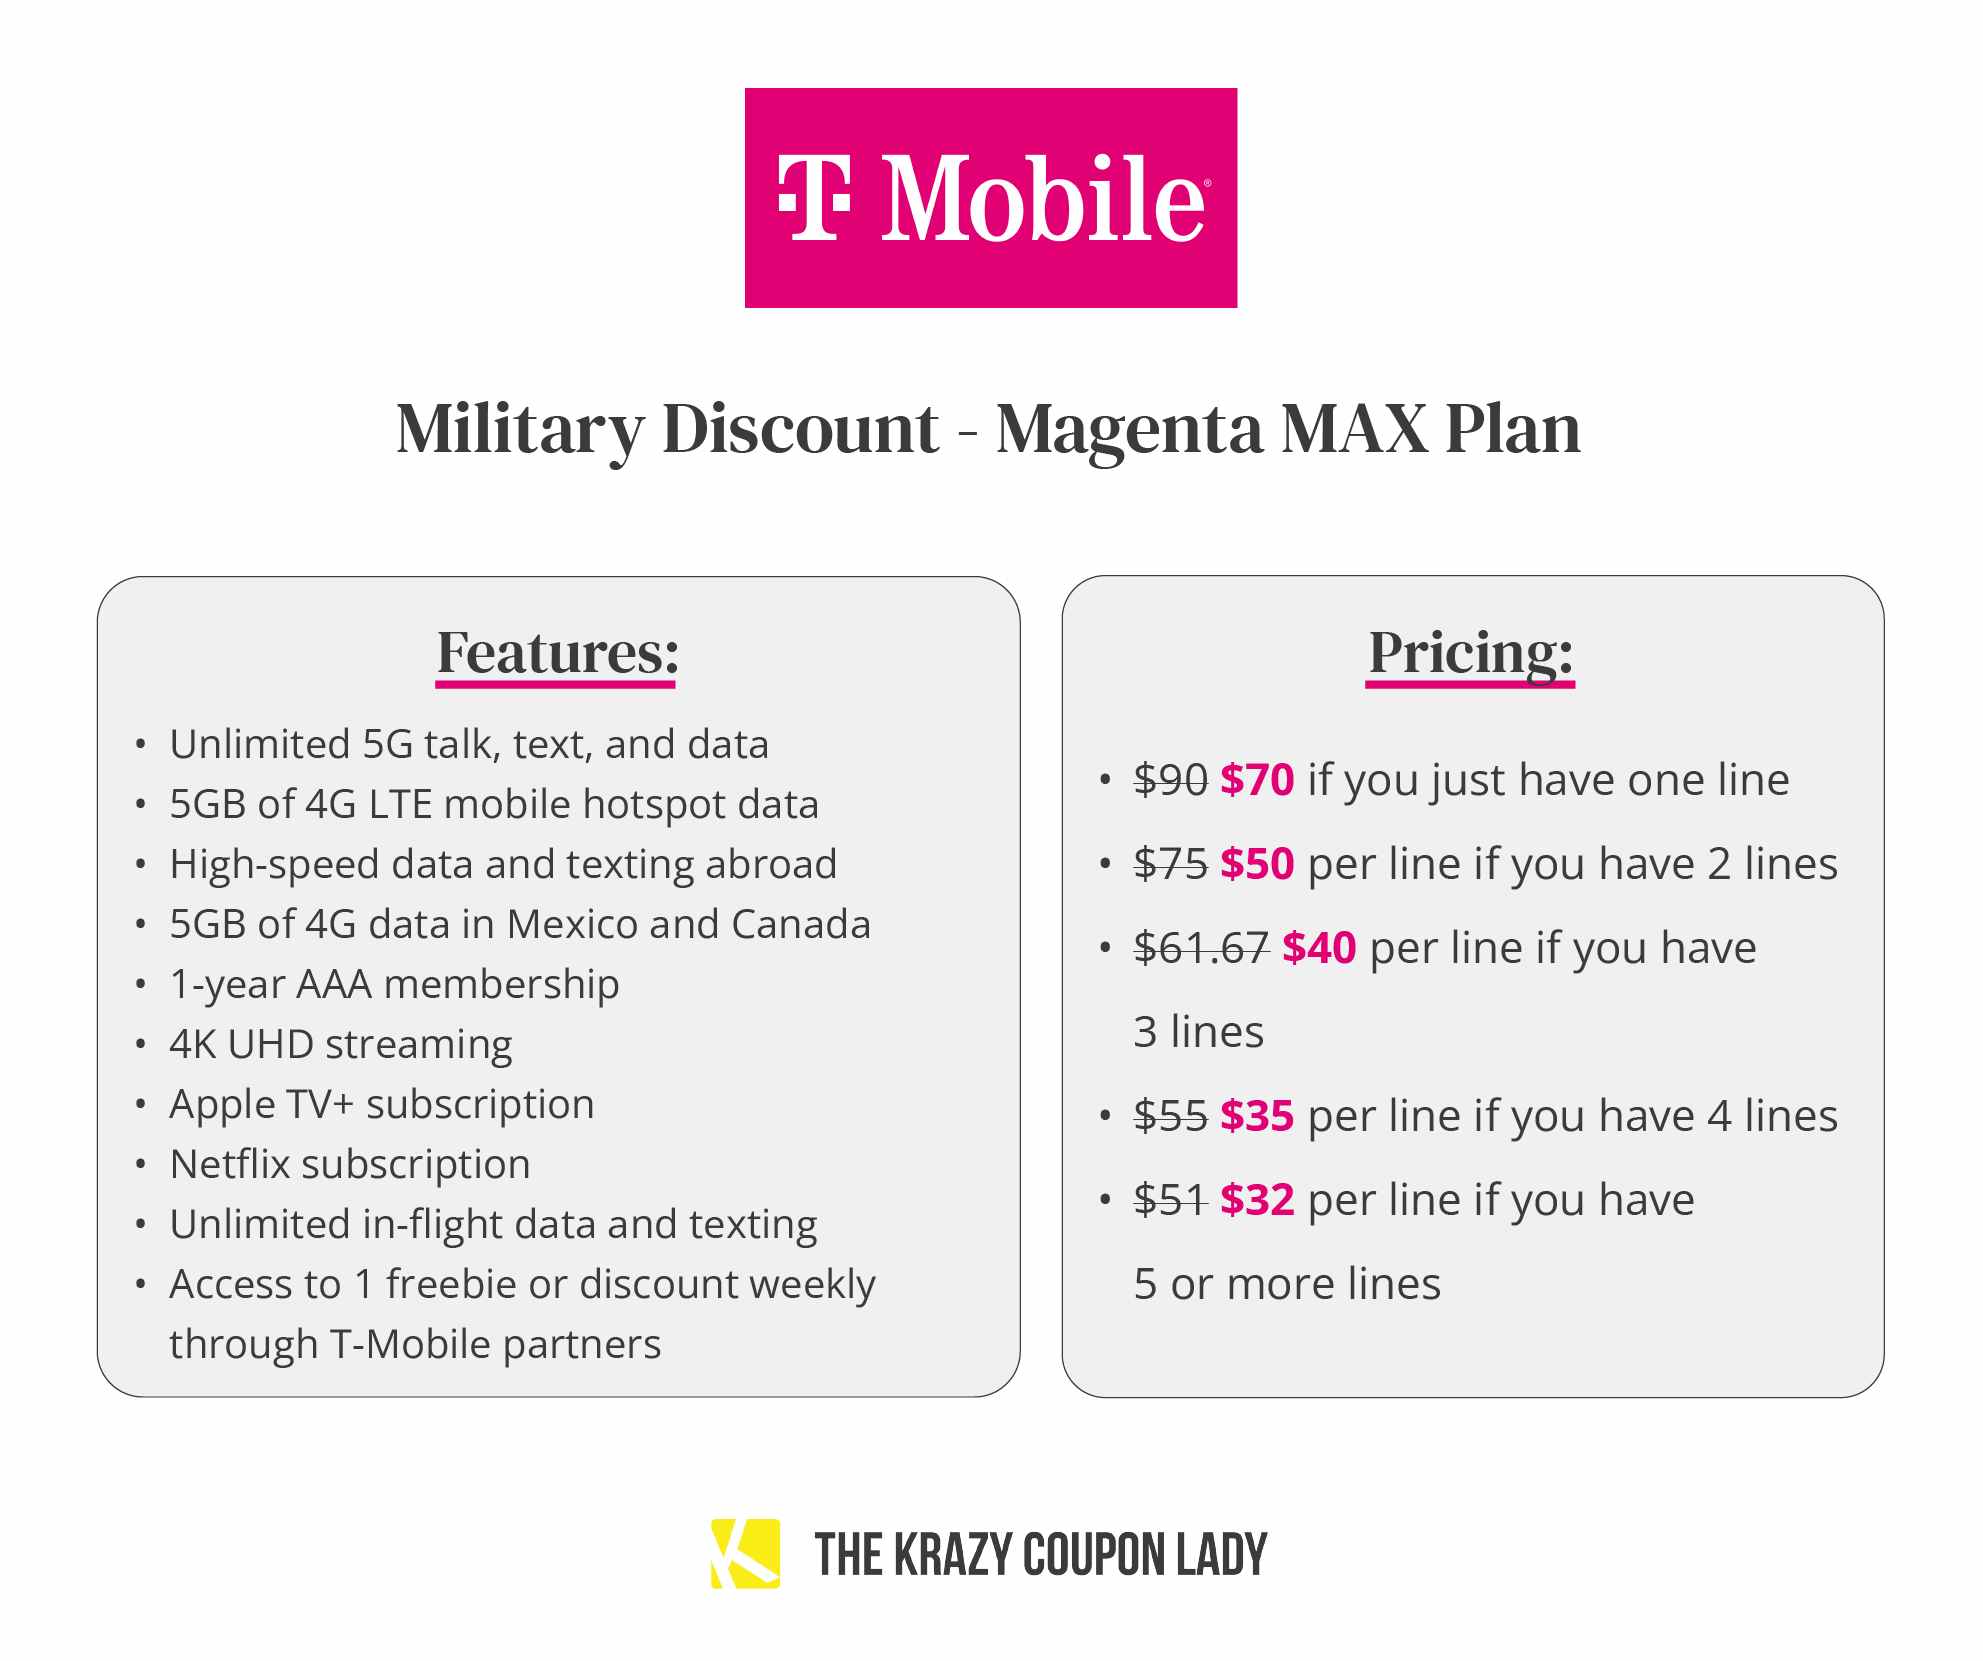 t-mobile military discount plan magenta max plan feature and pricing graphic